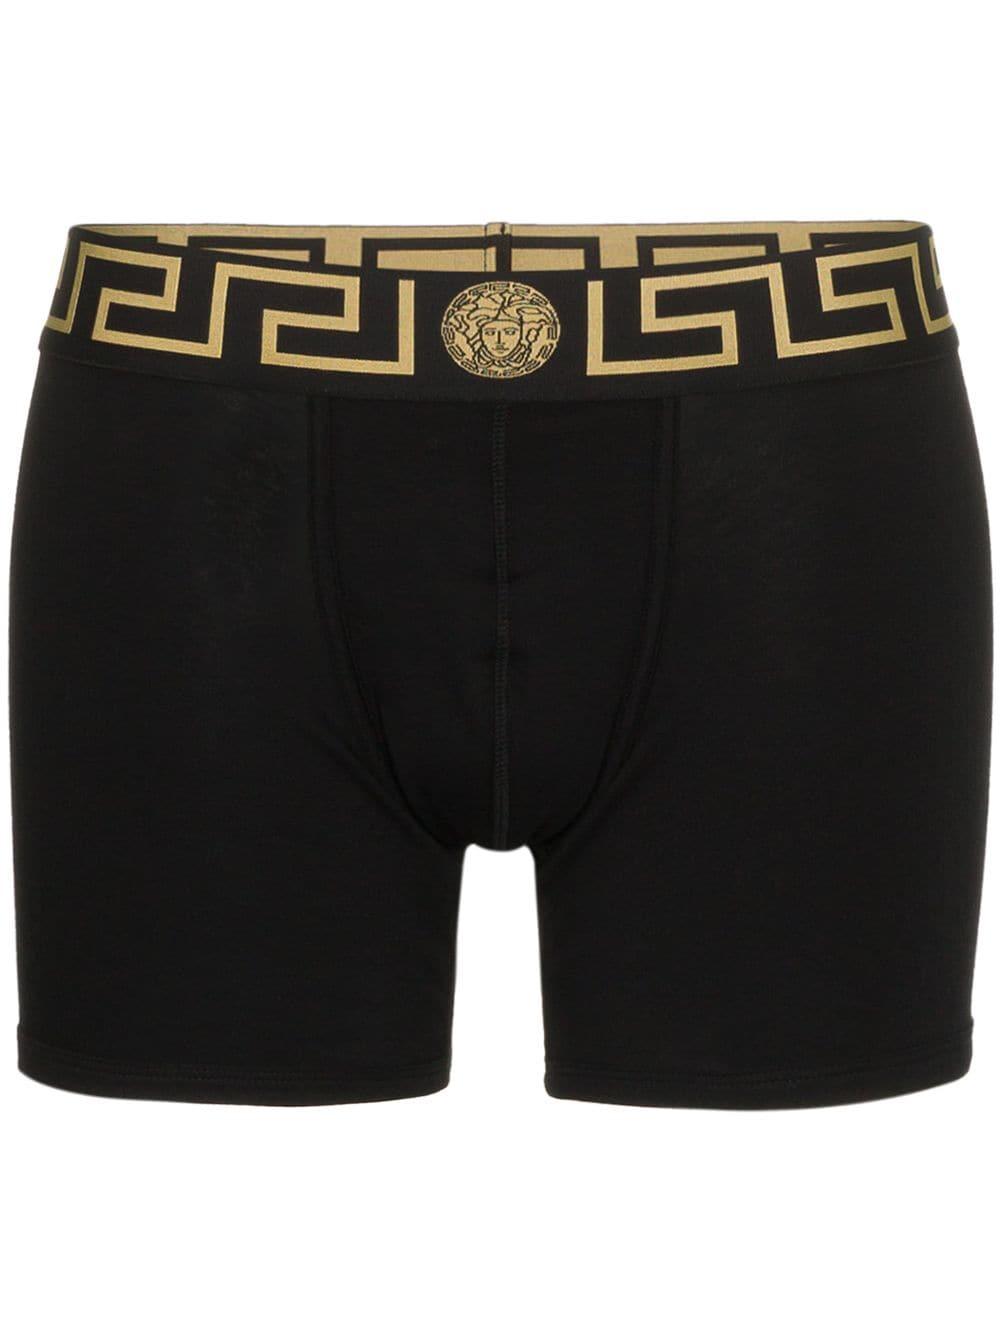 Versace Cotton Gold Trim Logo Boxers in Black for Men - Save 33% - Lyst